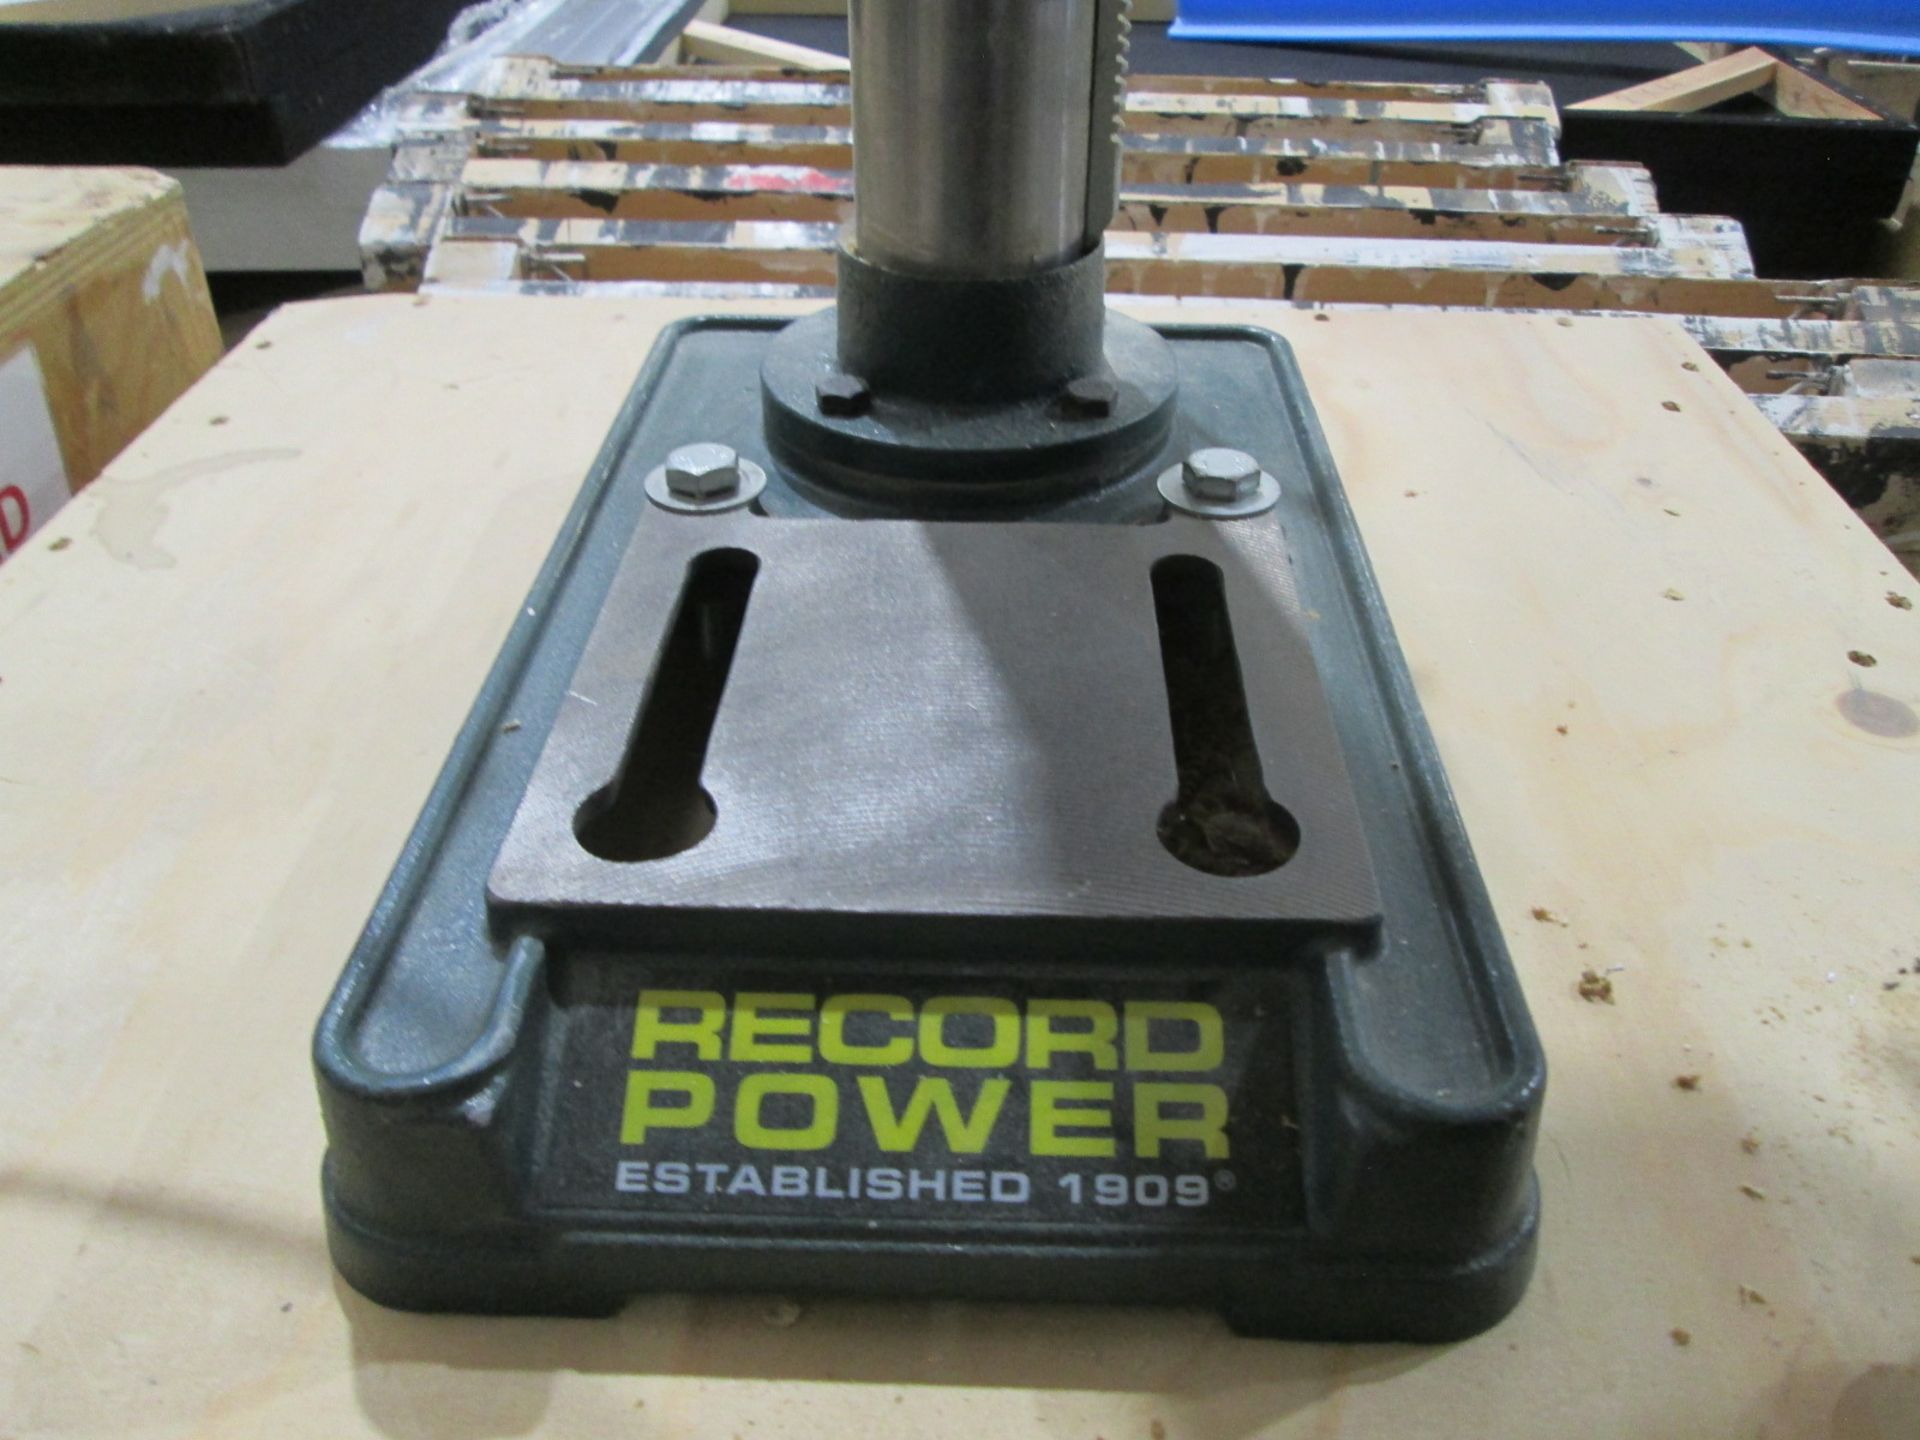 Record Power DP 25B Bench Top Pillar Drill, 240V, Mounted on wooden box frame - Image 5 of 7